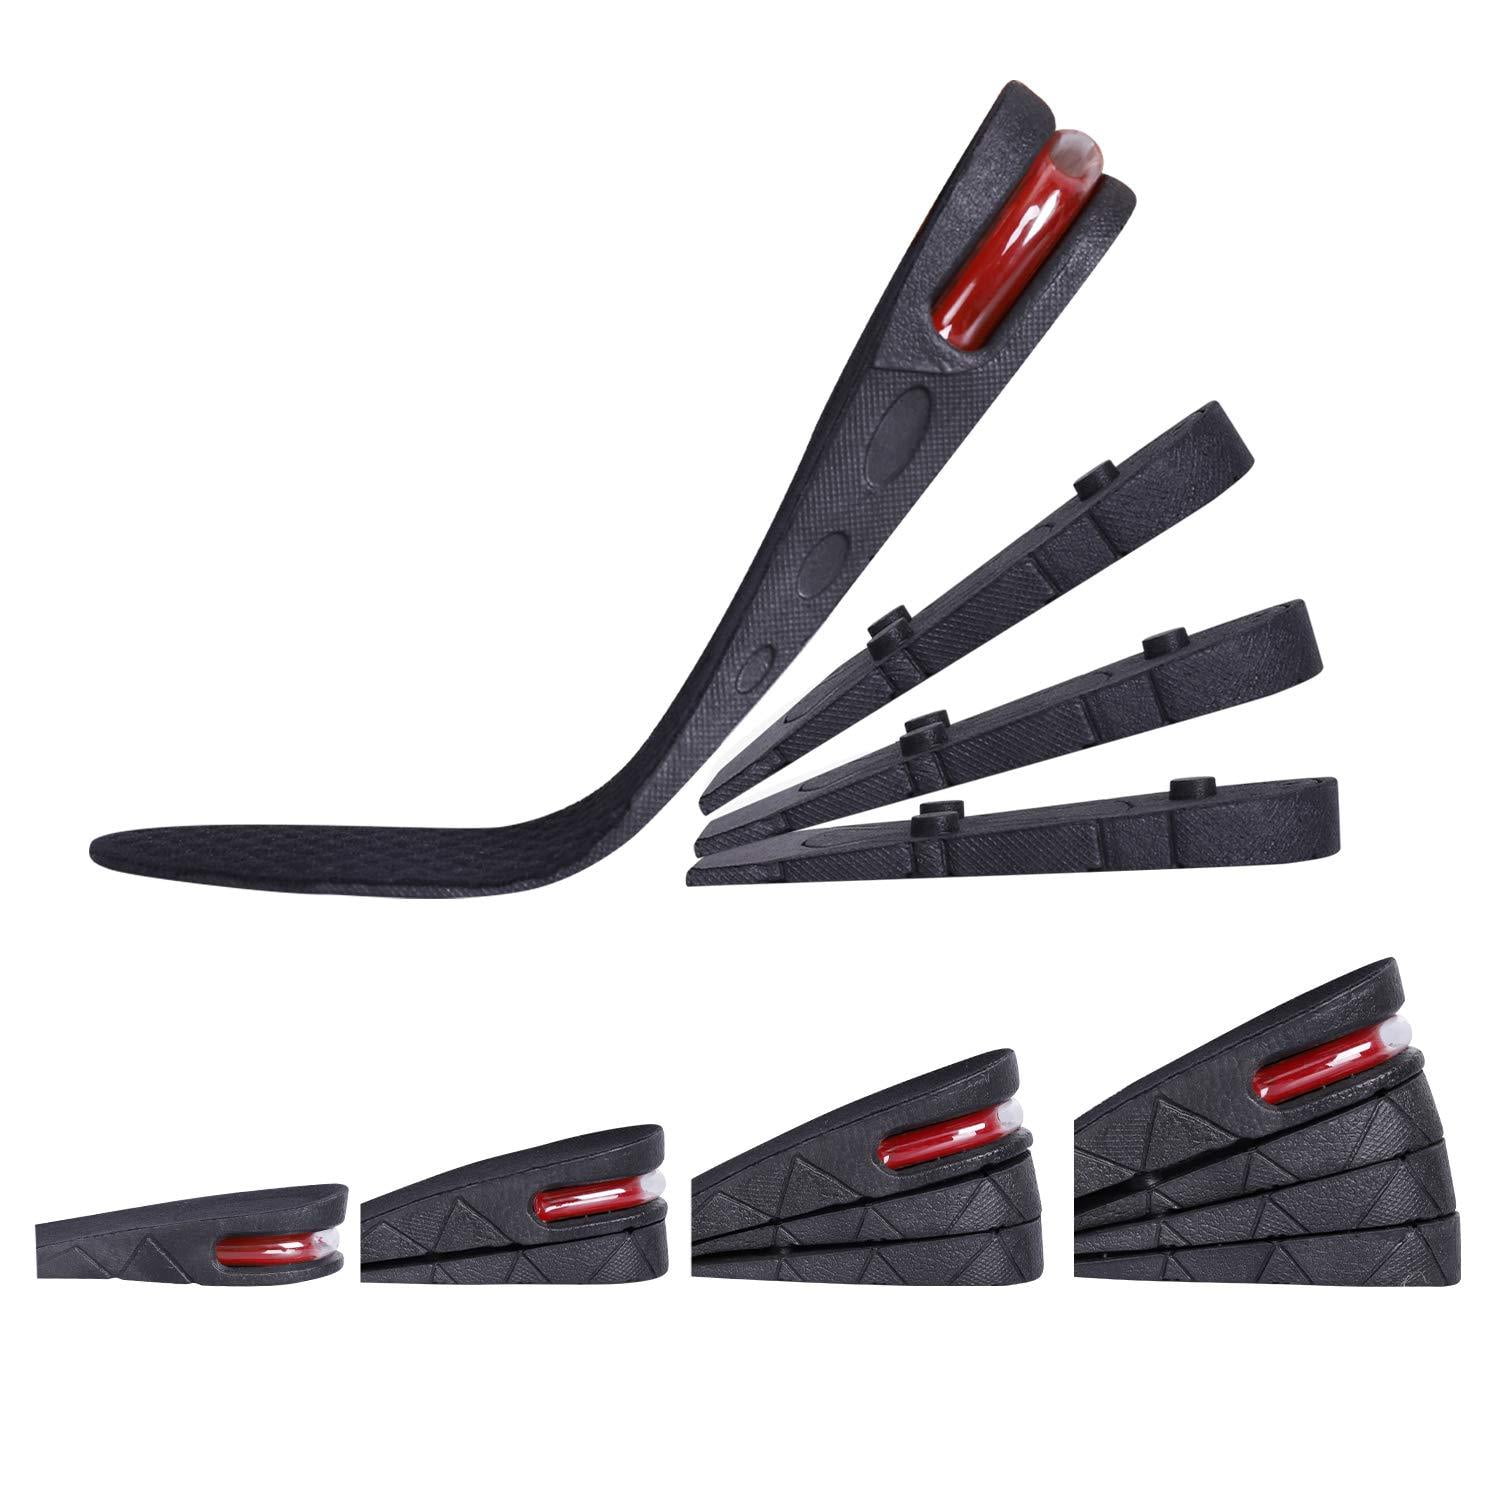 4 Layers Details about    Height Increase Insoles,Adjustable Orthopedic Heel Lift Inserts,Heel